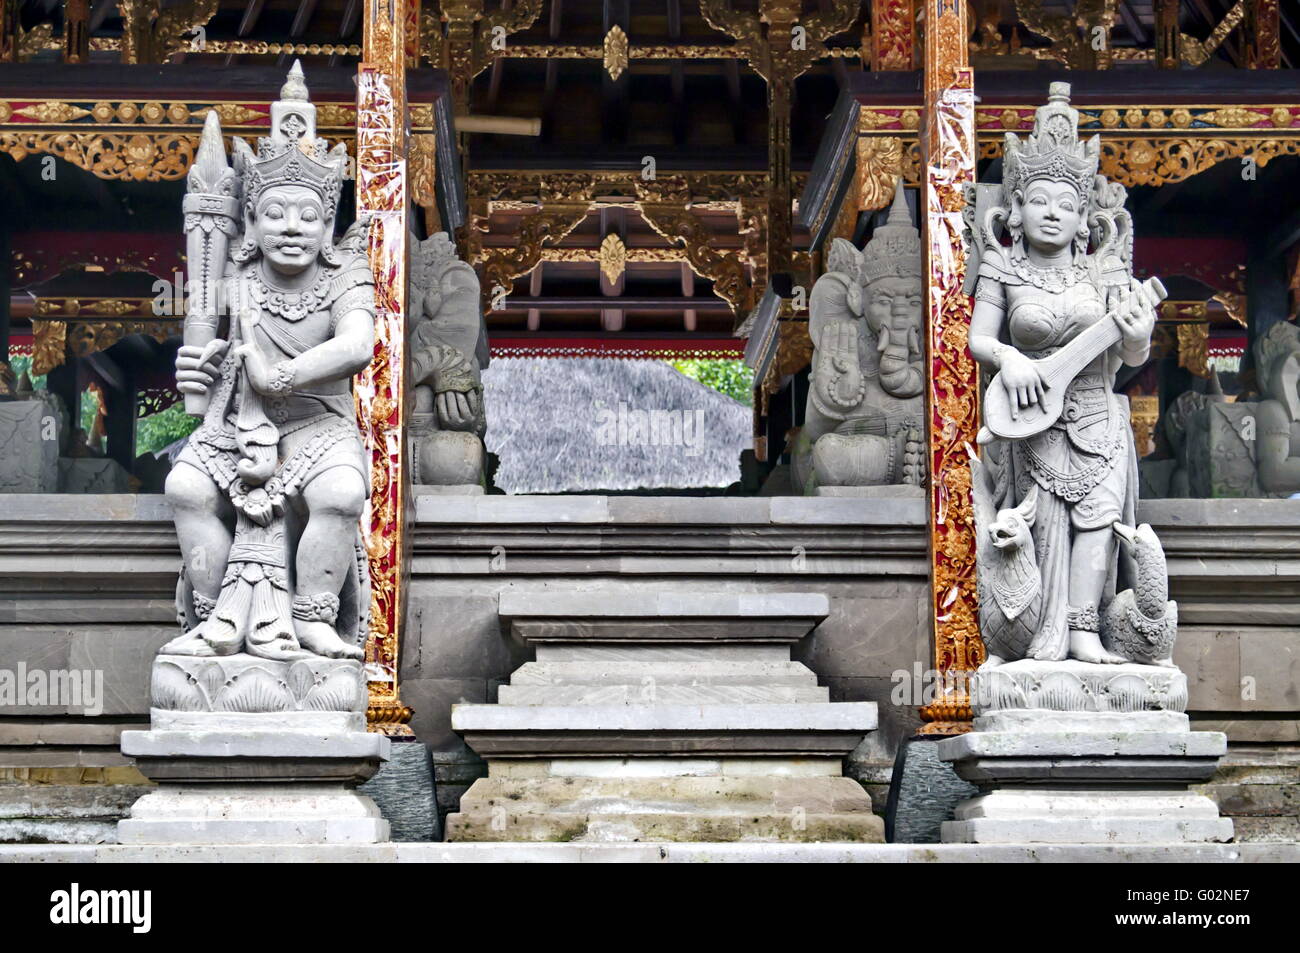 Hindu statues guardian in a indonesian temple Stock Photo